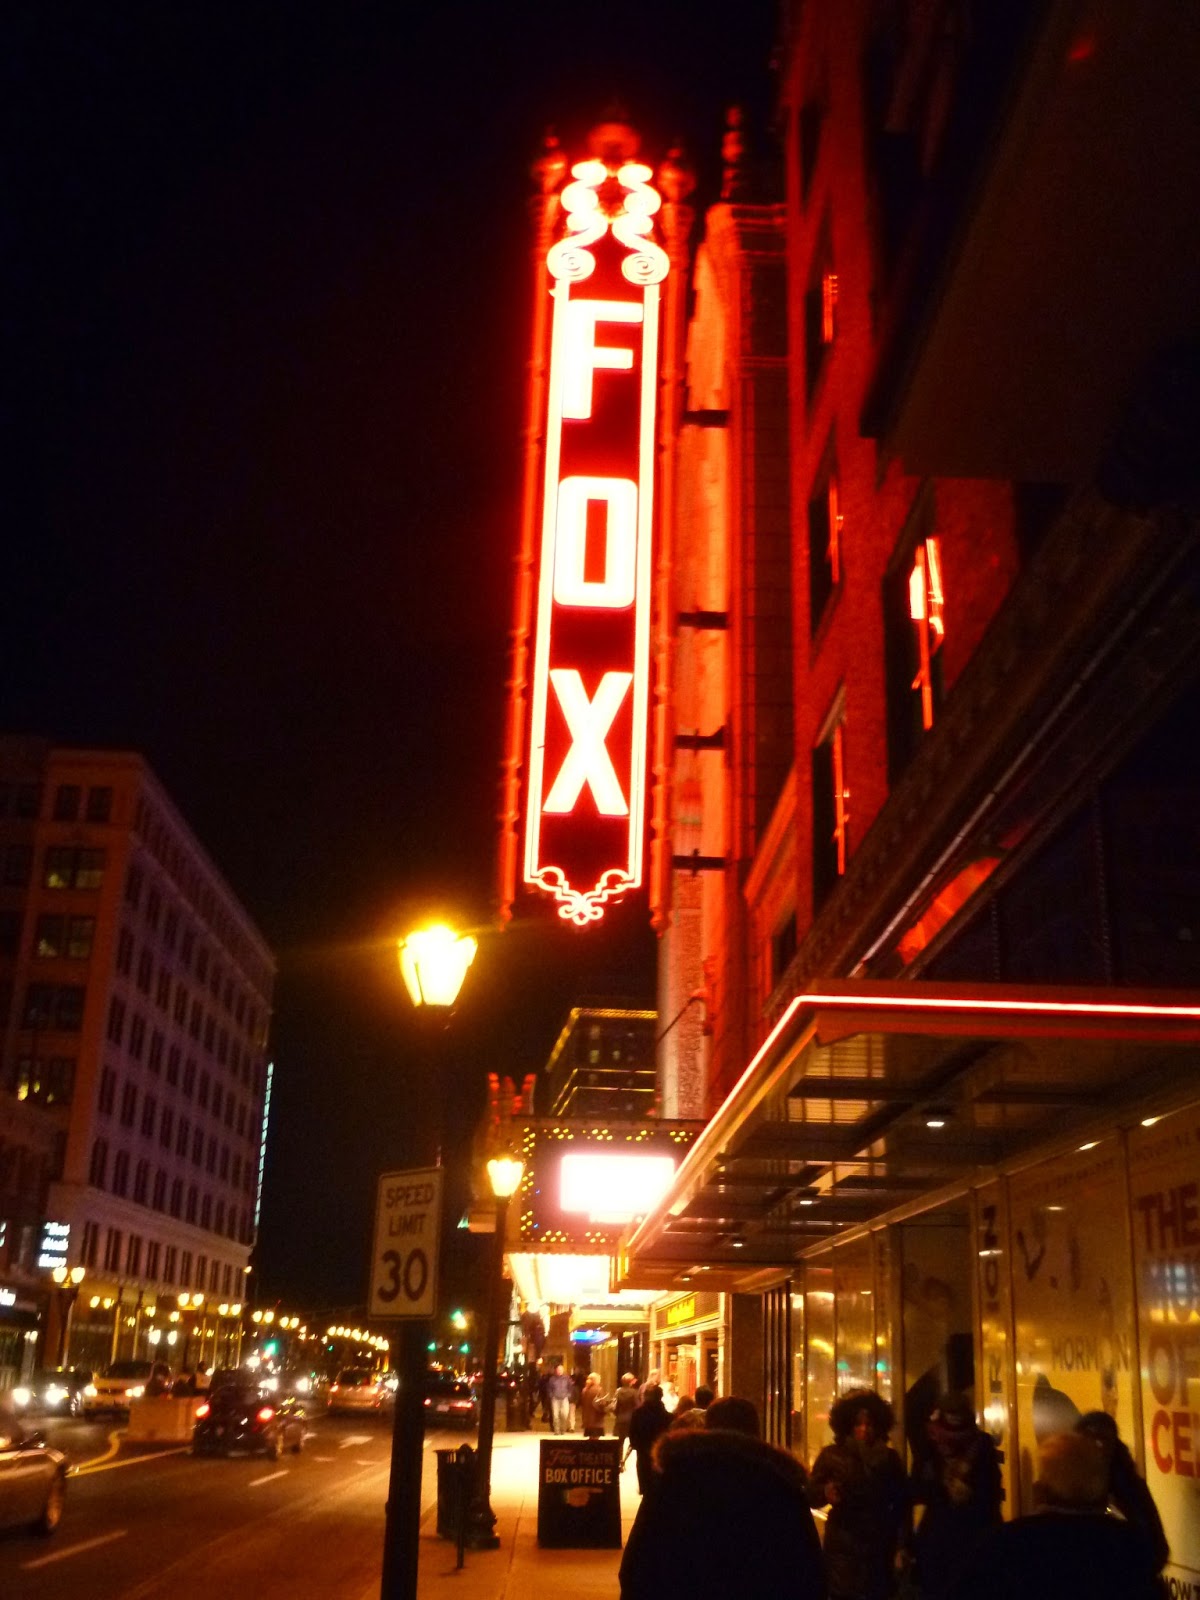 Fox, Mormons and Chocolate Martinis: A Night Out in St Louis